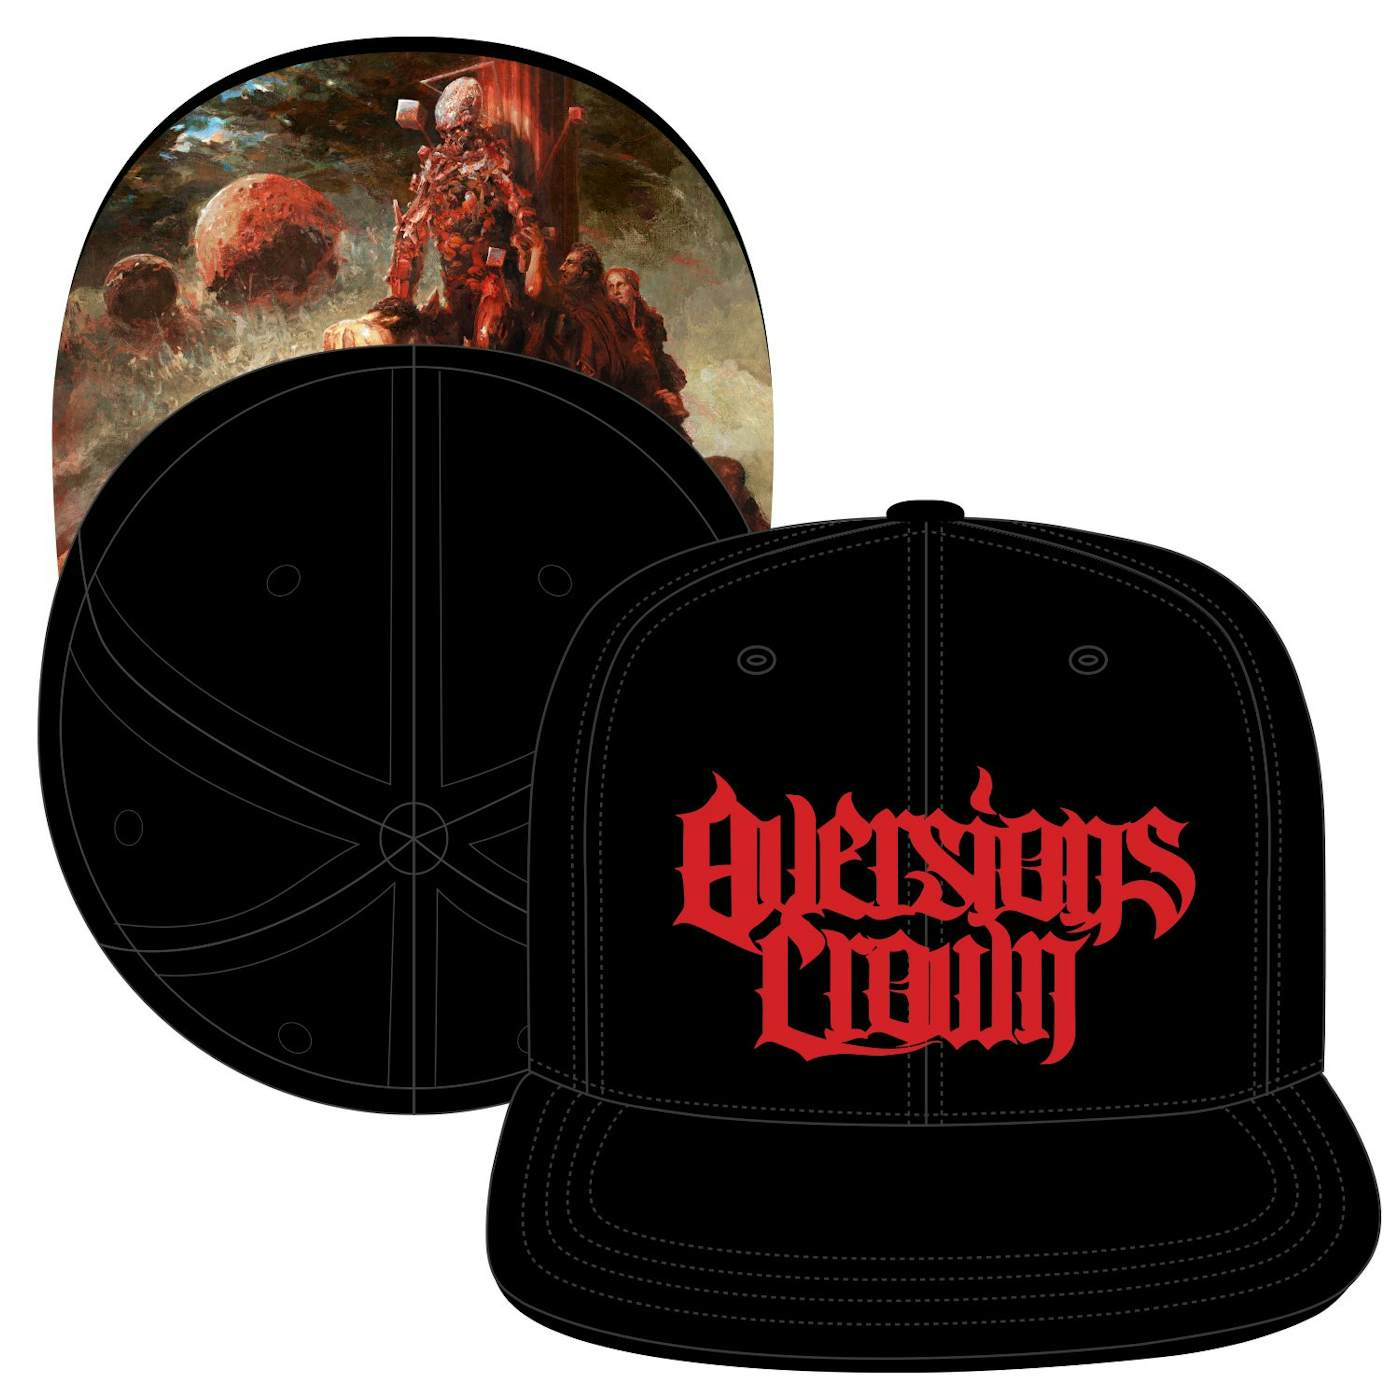 Aversions Crown "Hell Will Come For Us All" Hat